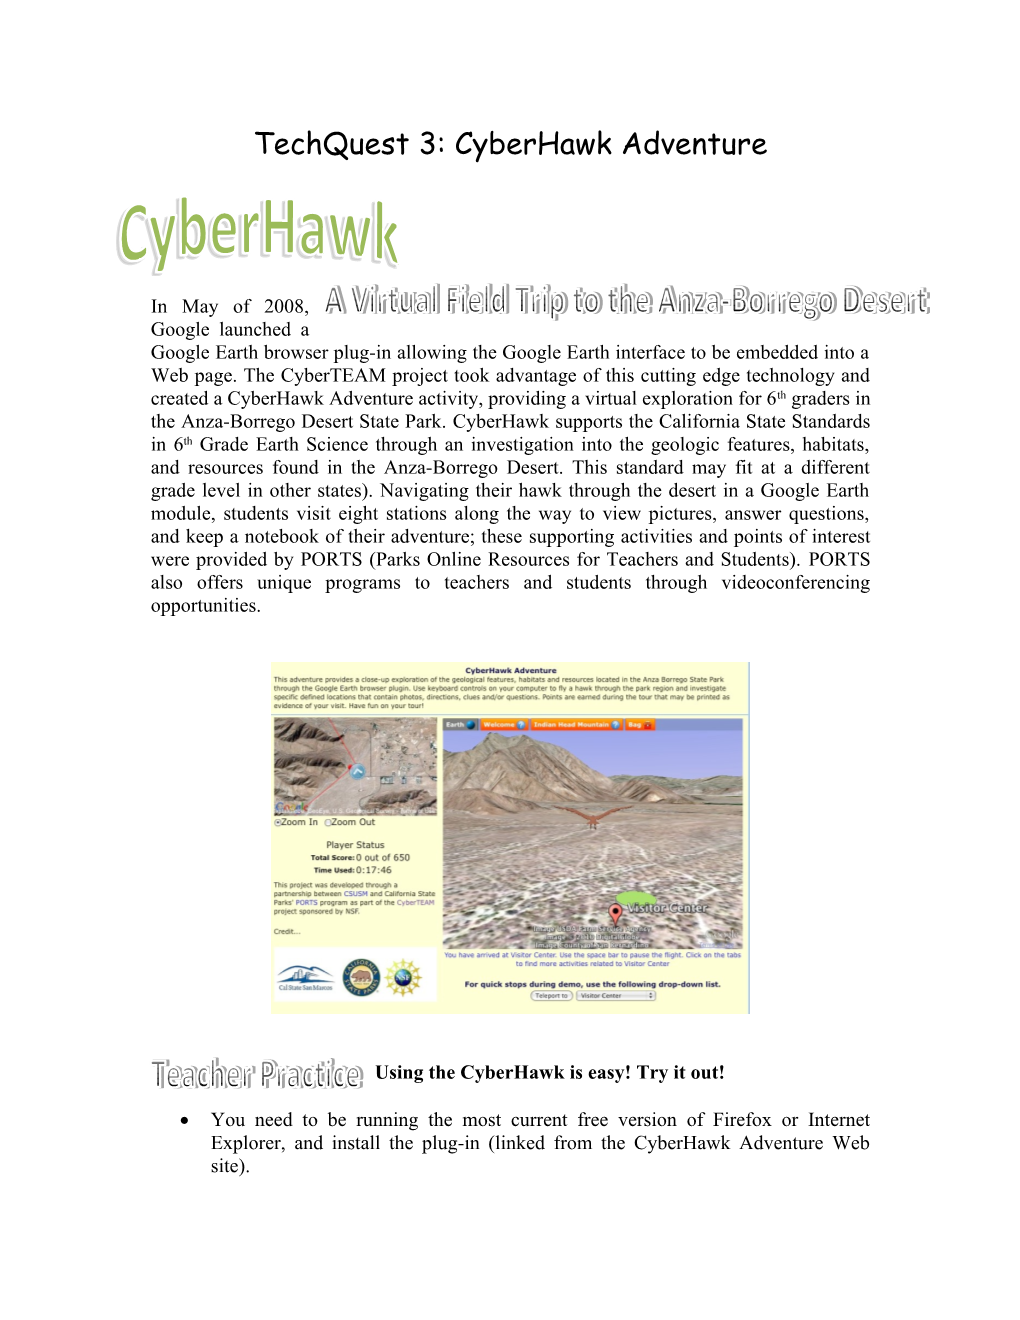 Using the Cyberhawk Is Easy! Try It Out!